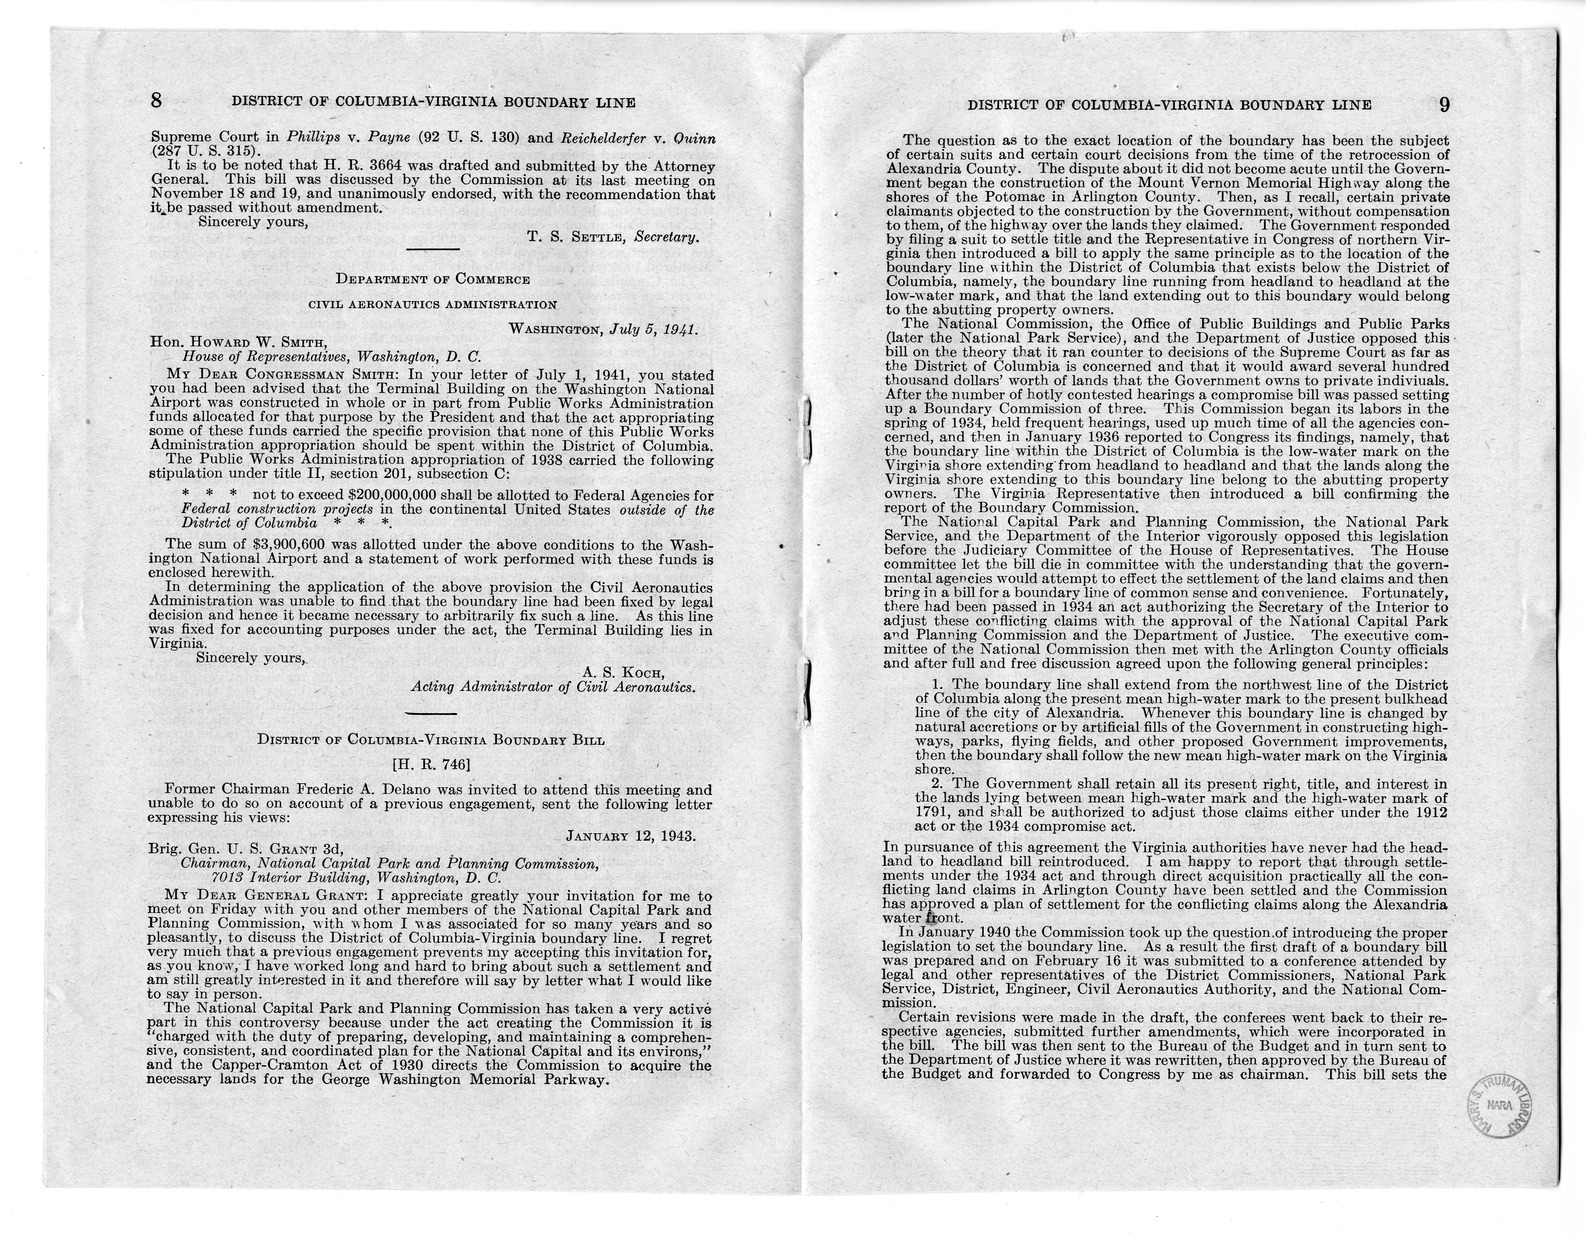 Memorandum from Harold D. Smith to M. C. Latta, H.R. 3220, To Establish a Boundary Line Between the District of Columbia and the Commonwealth of Virginia, with Attachments